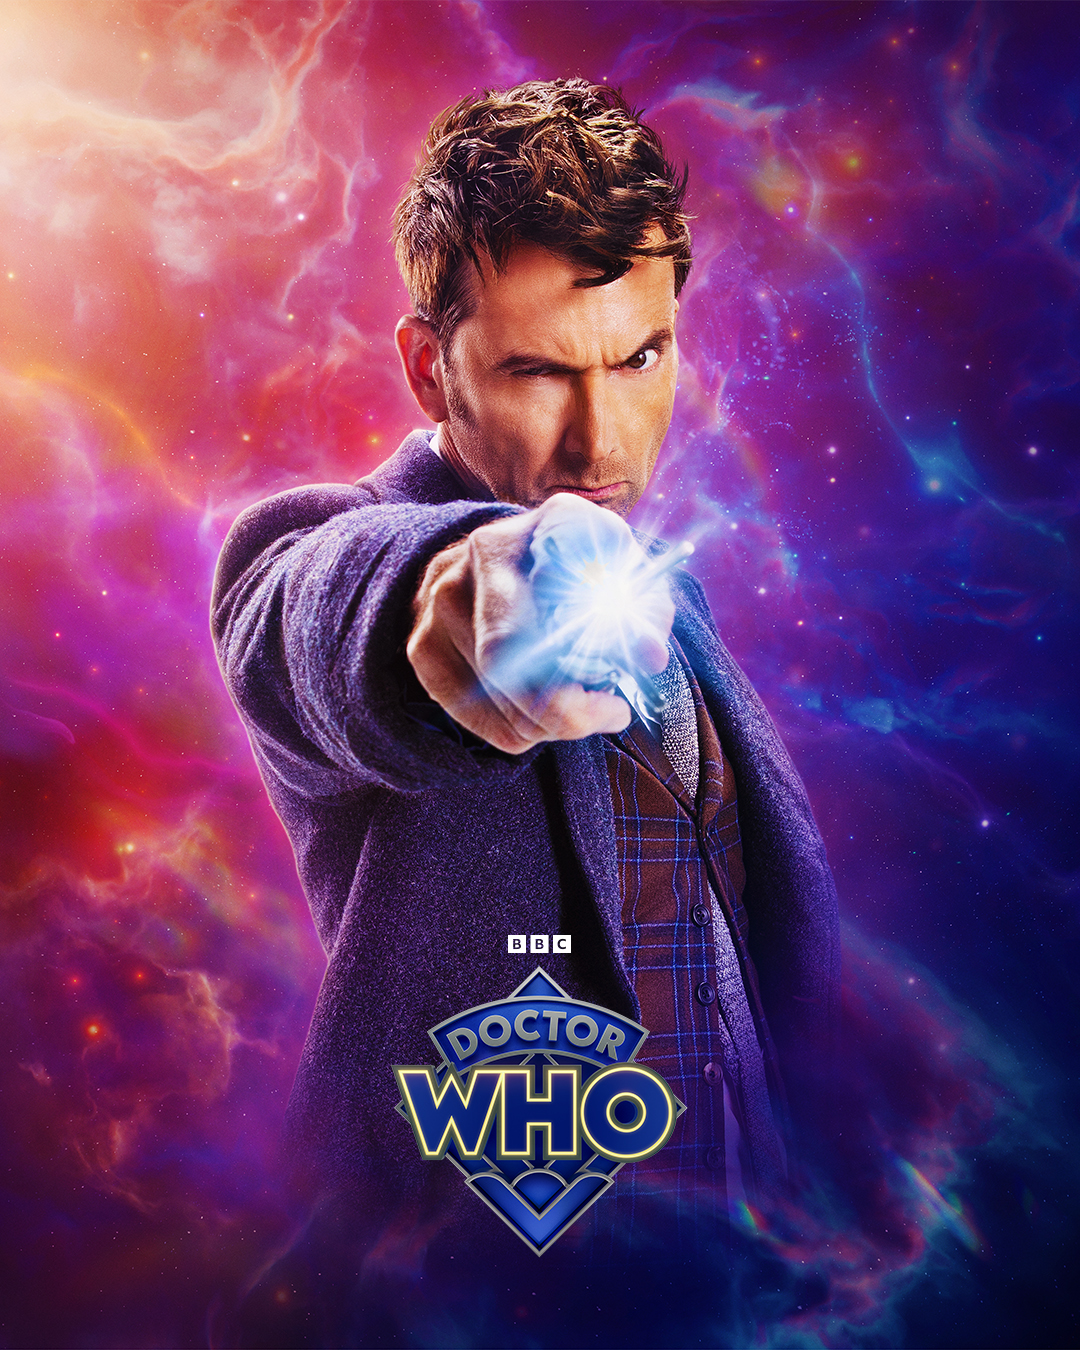 Character poster featuring David Tennant as the Doctor in Doctor Who.